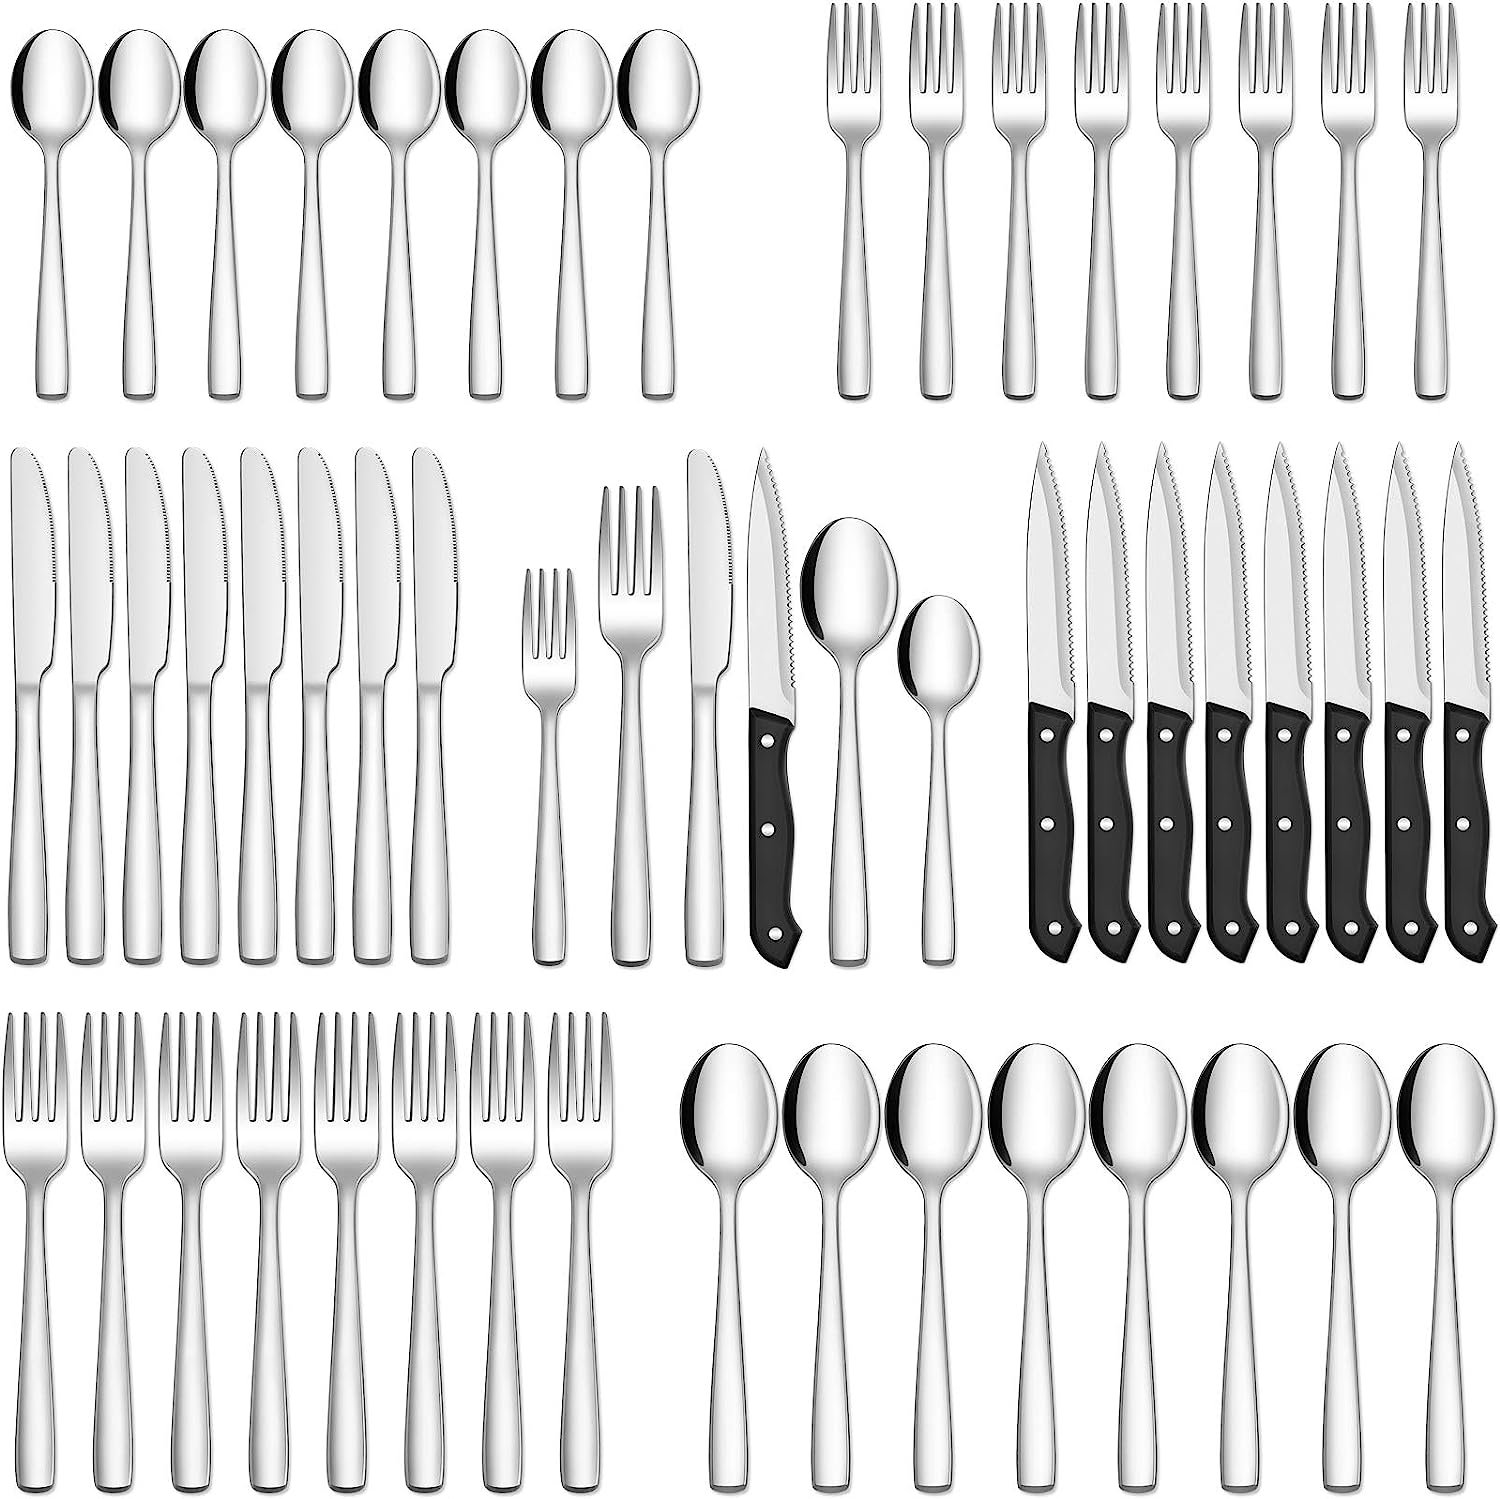 HIWARE 48-Piece Silverware Set with Steak Knives for [...]